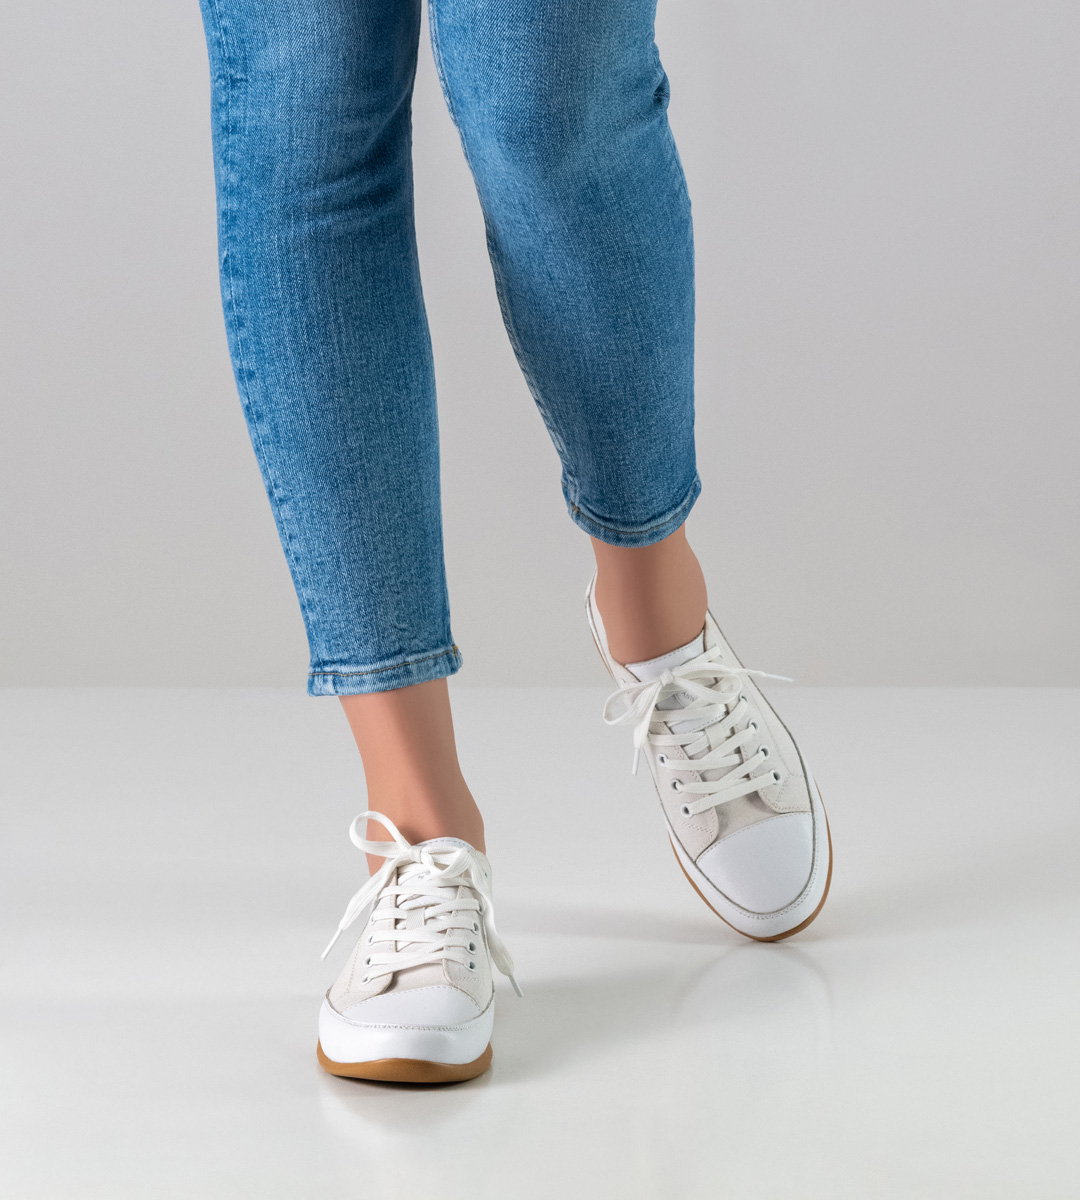 Blue jeans in combination with white dance sneaker for women by Suny